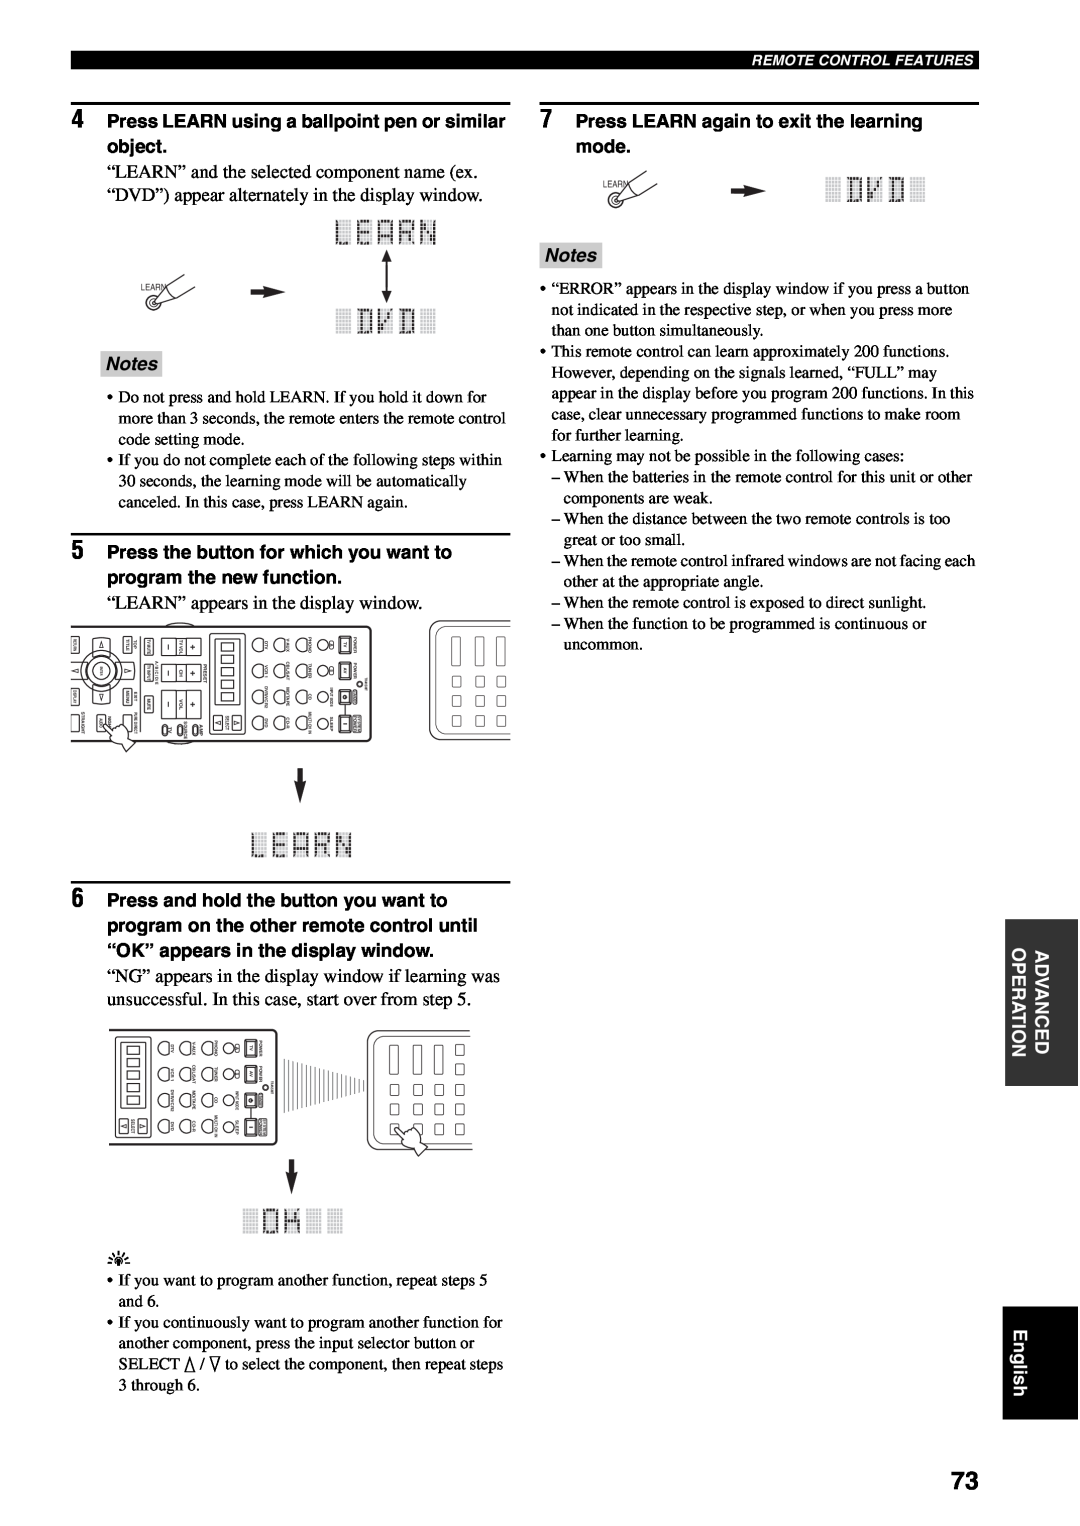 Yamaha RX-V2500 owner manual 7Press LEARN again to exit the learning mode, Notes 